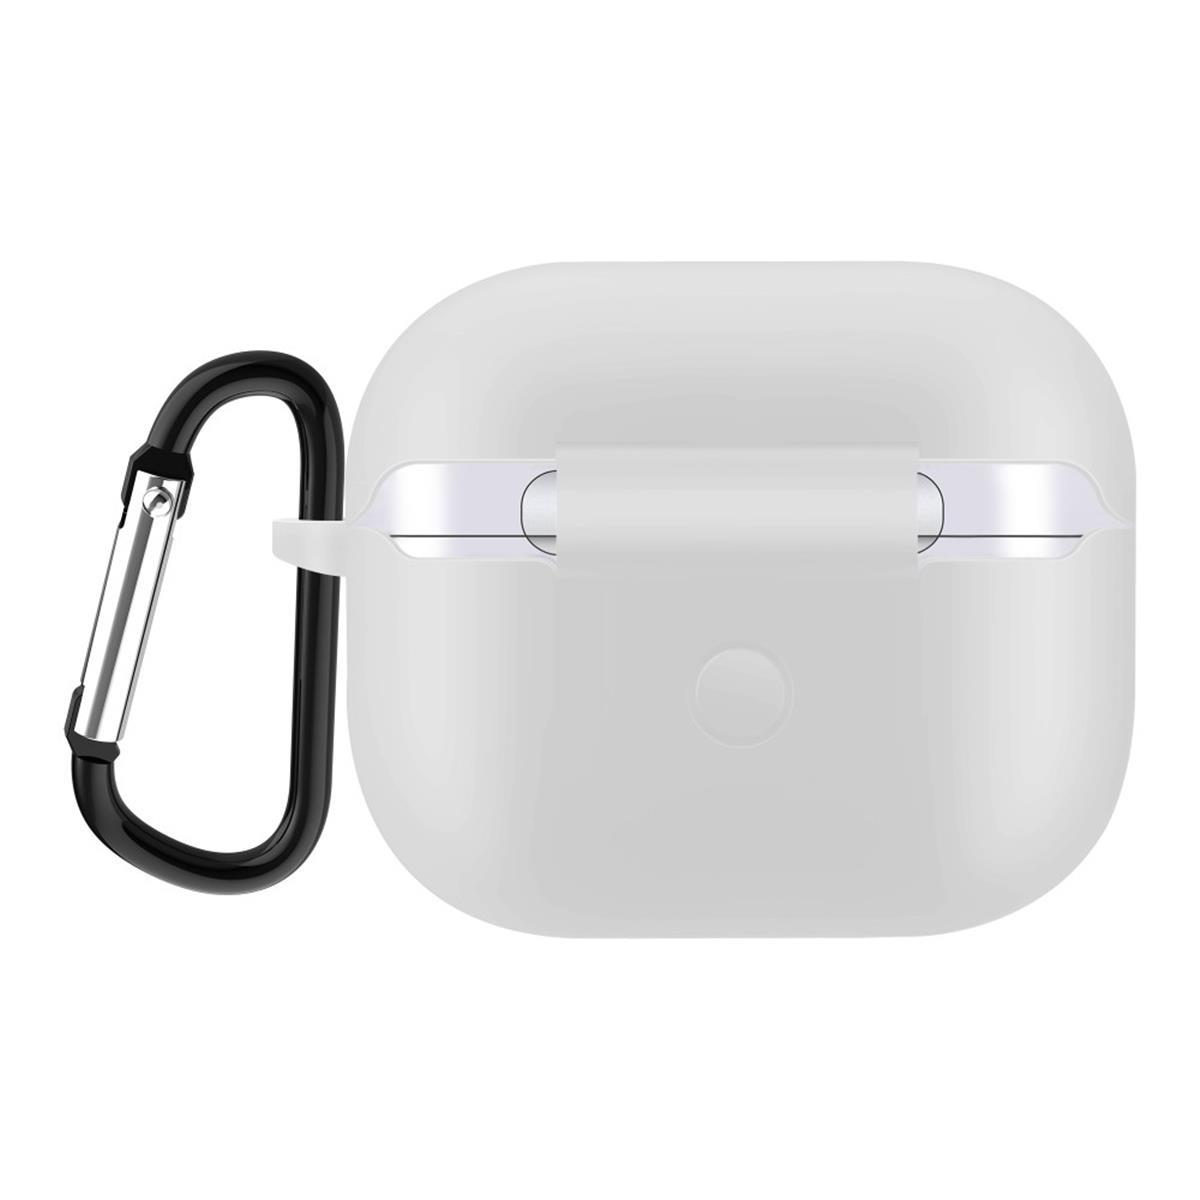 76801 für Apple Weiß, Ladecase 3 AirPods Silikoncover Unisex, COVERKINGZ